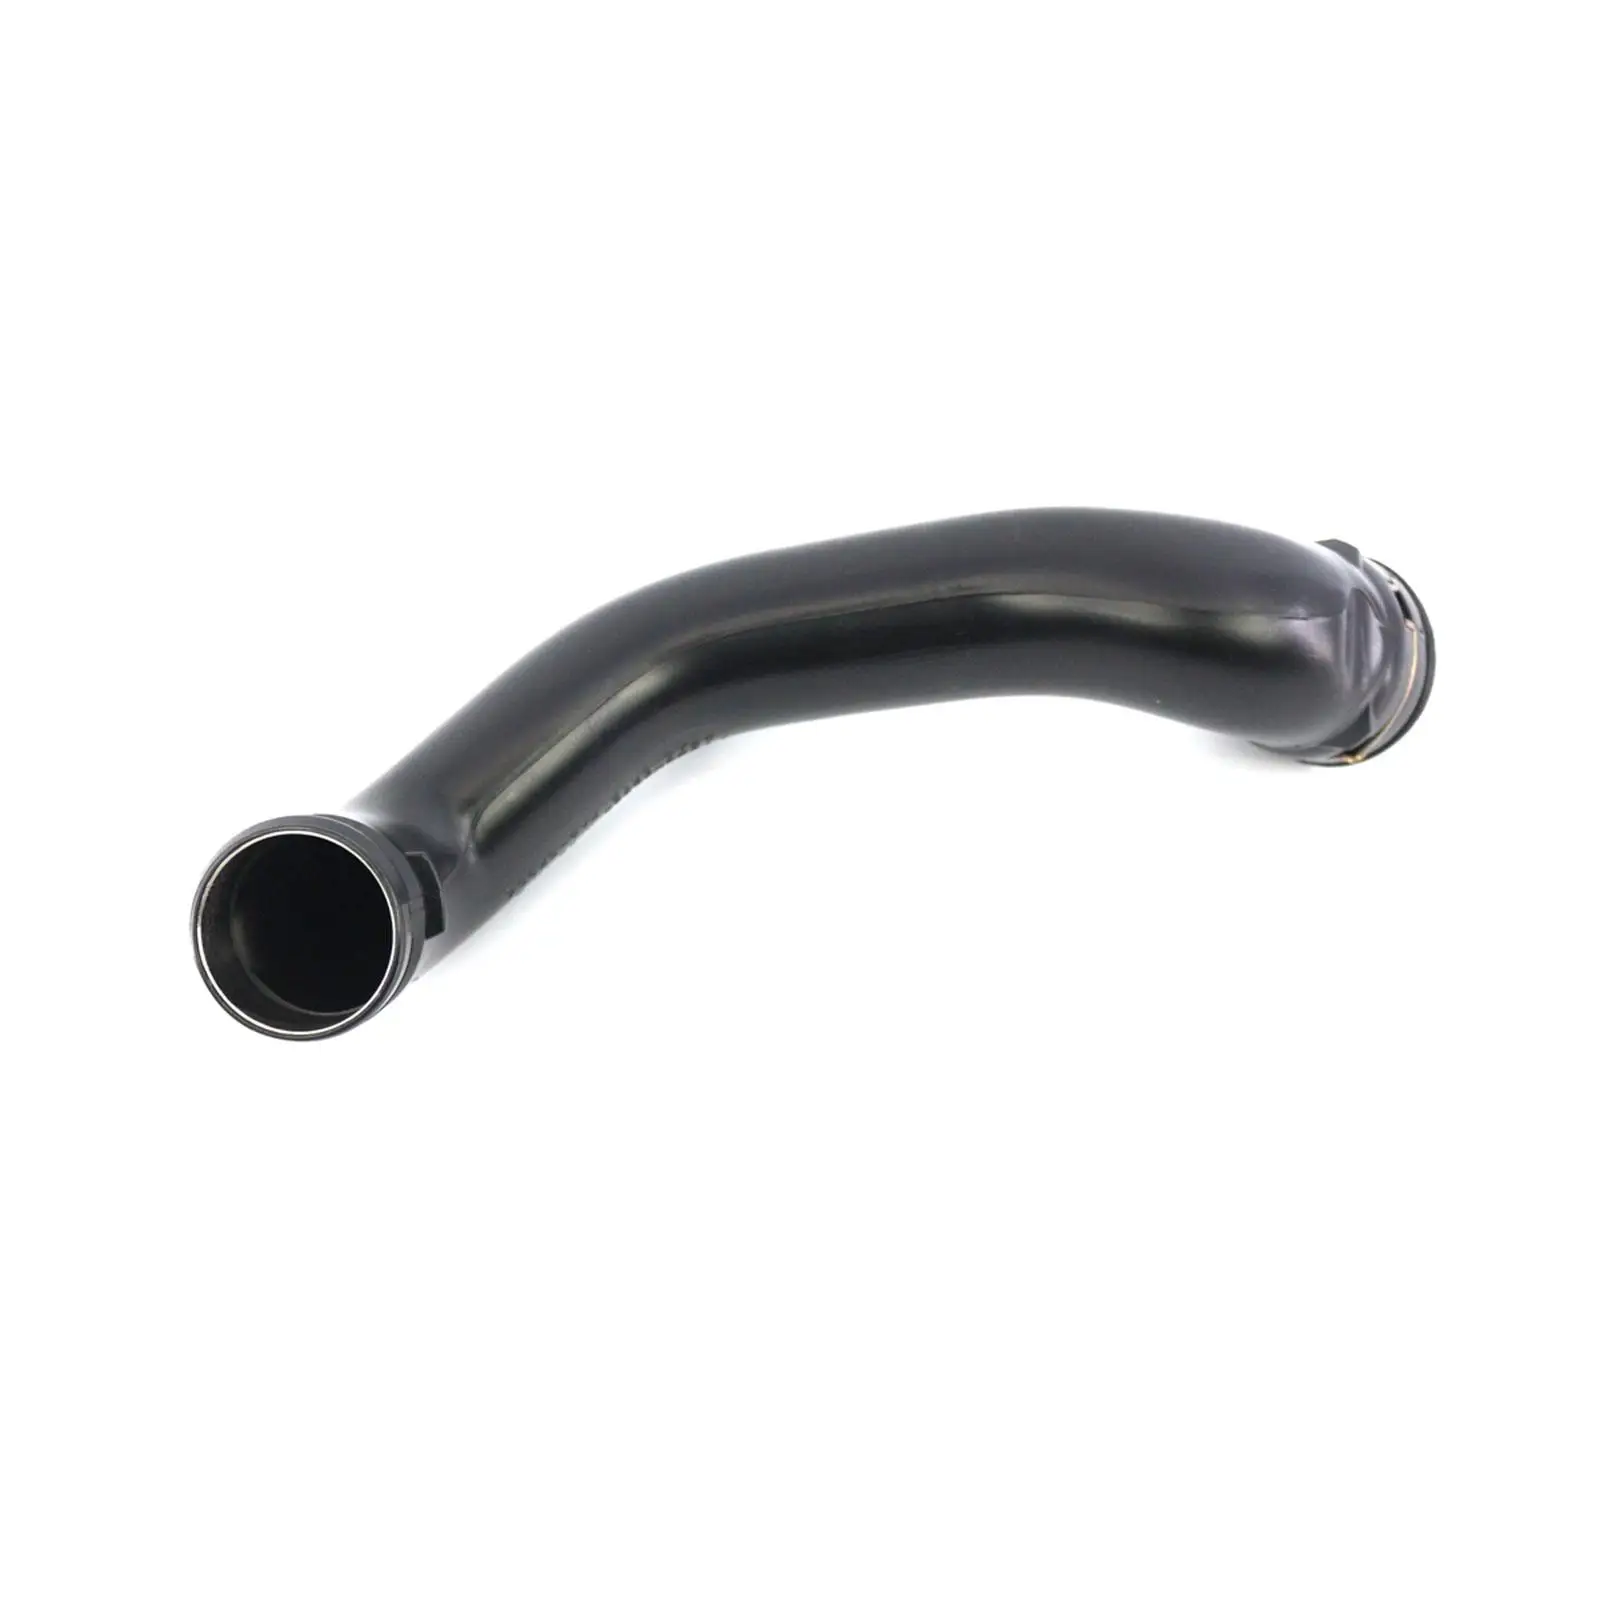 Intake Charge Tube Booster Intake Pipe Replacement Accessory Car Engine Air Intake Hose for BMW x5 E70 Lci x6 E71 x6 F16